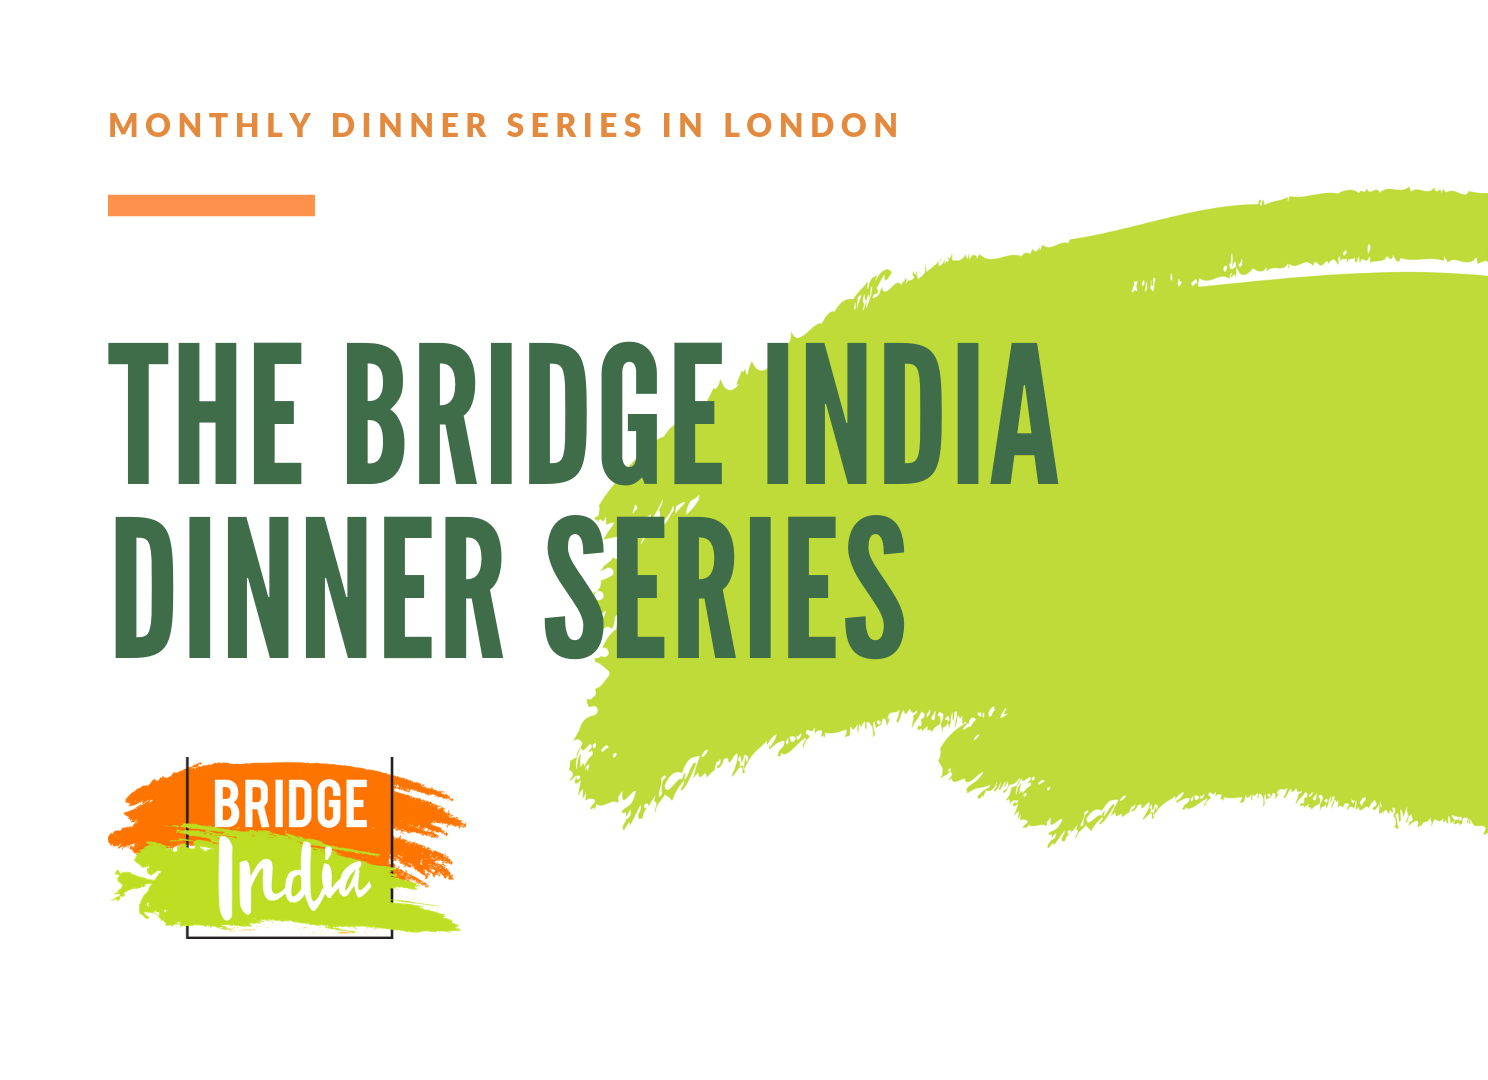 CWEIC Chairman Lord Marland Attends Bridge India Dinner as Guest Speaker